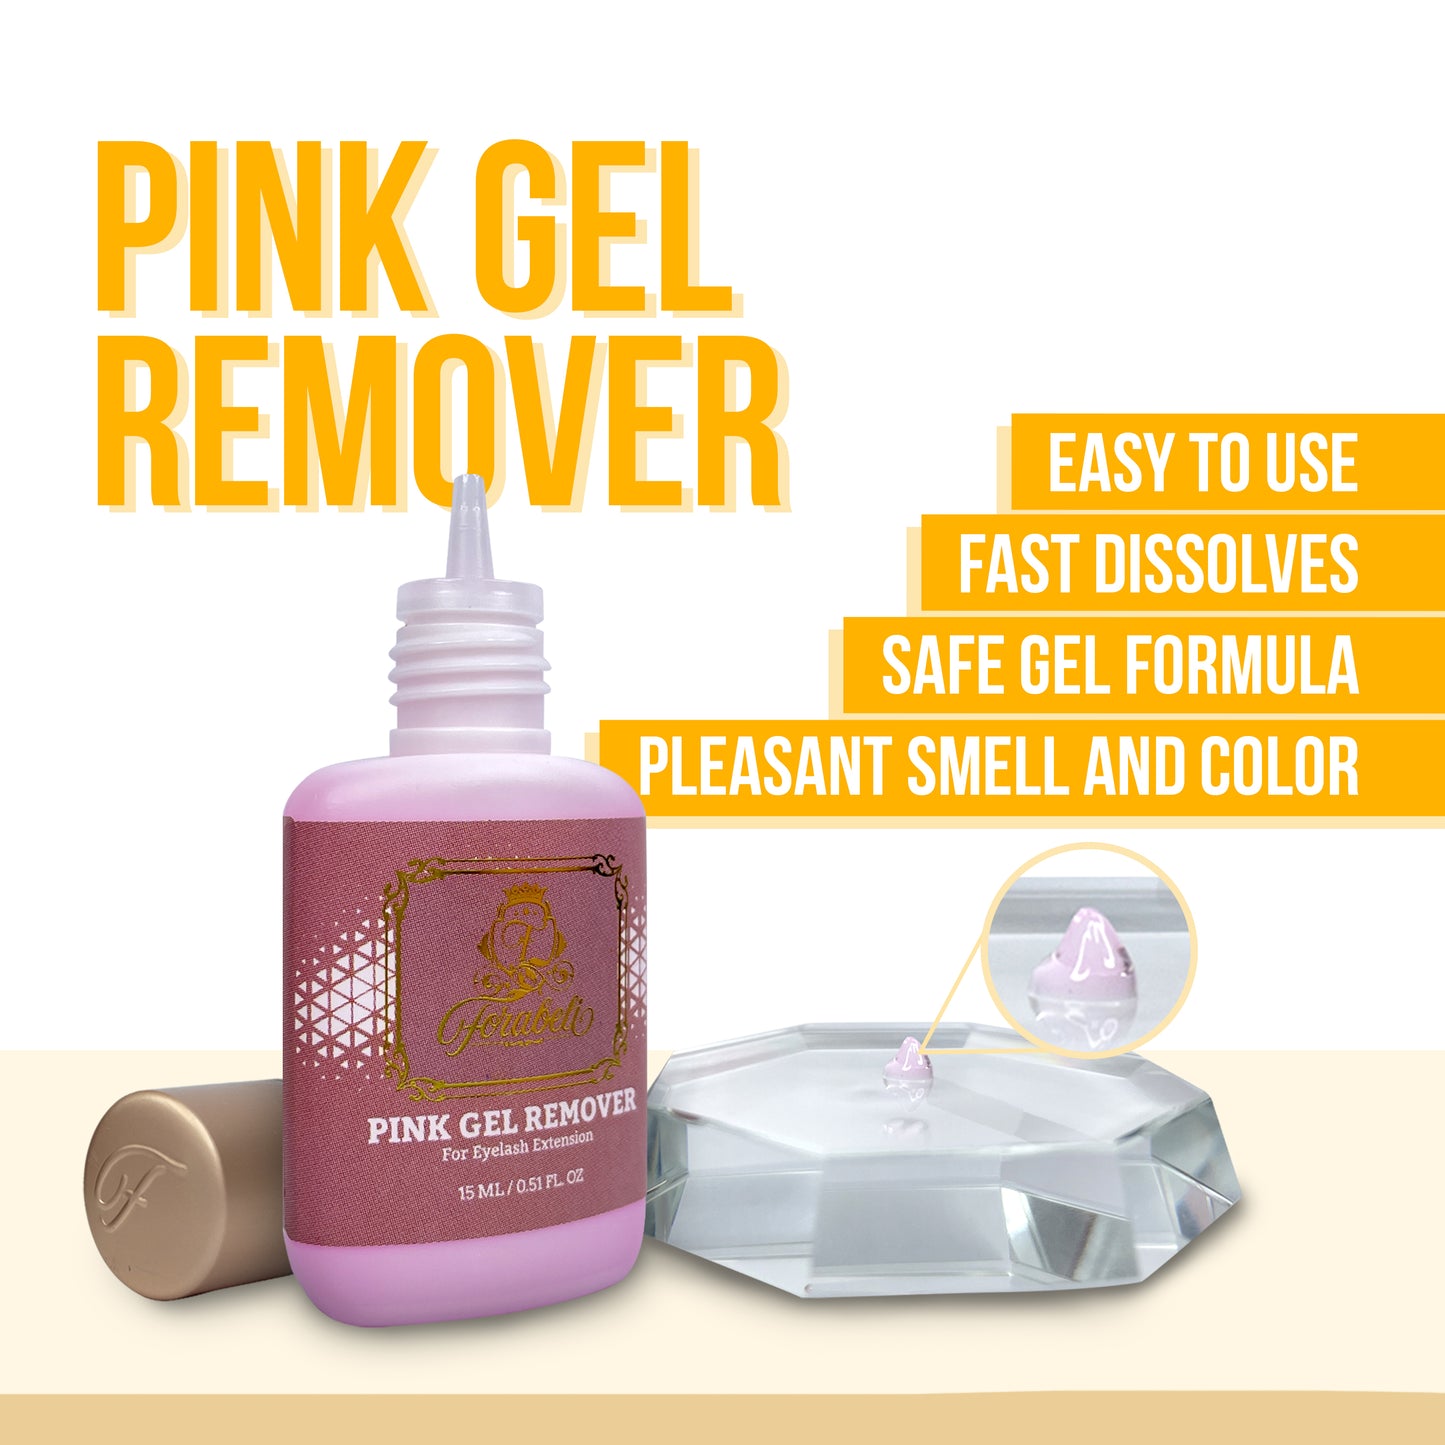 Product image of Forabeli Eyelash Extension Glue Remover, a pink gel lash remover that is GBL free, gentle on eyelashes, and effectively dissolves lash extension adhesive. It is a safe and easy-to-apply lash glue cleaner.